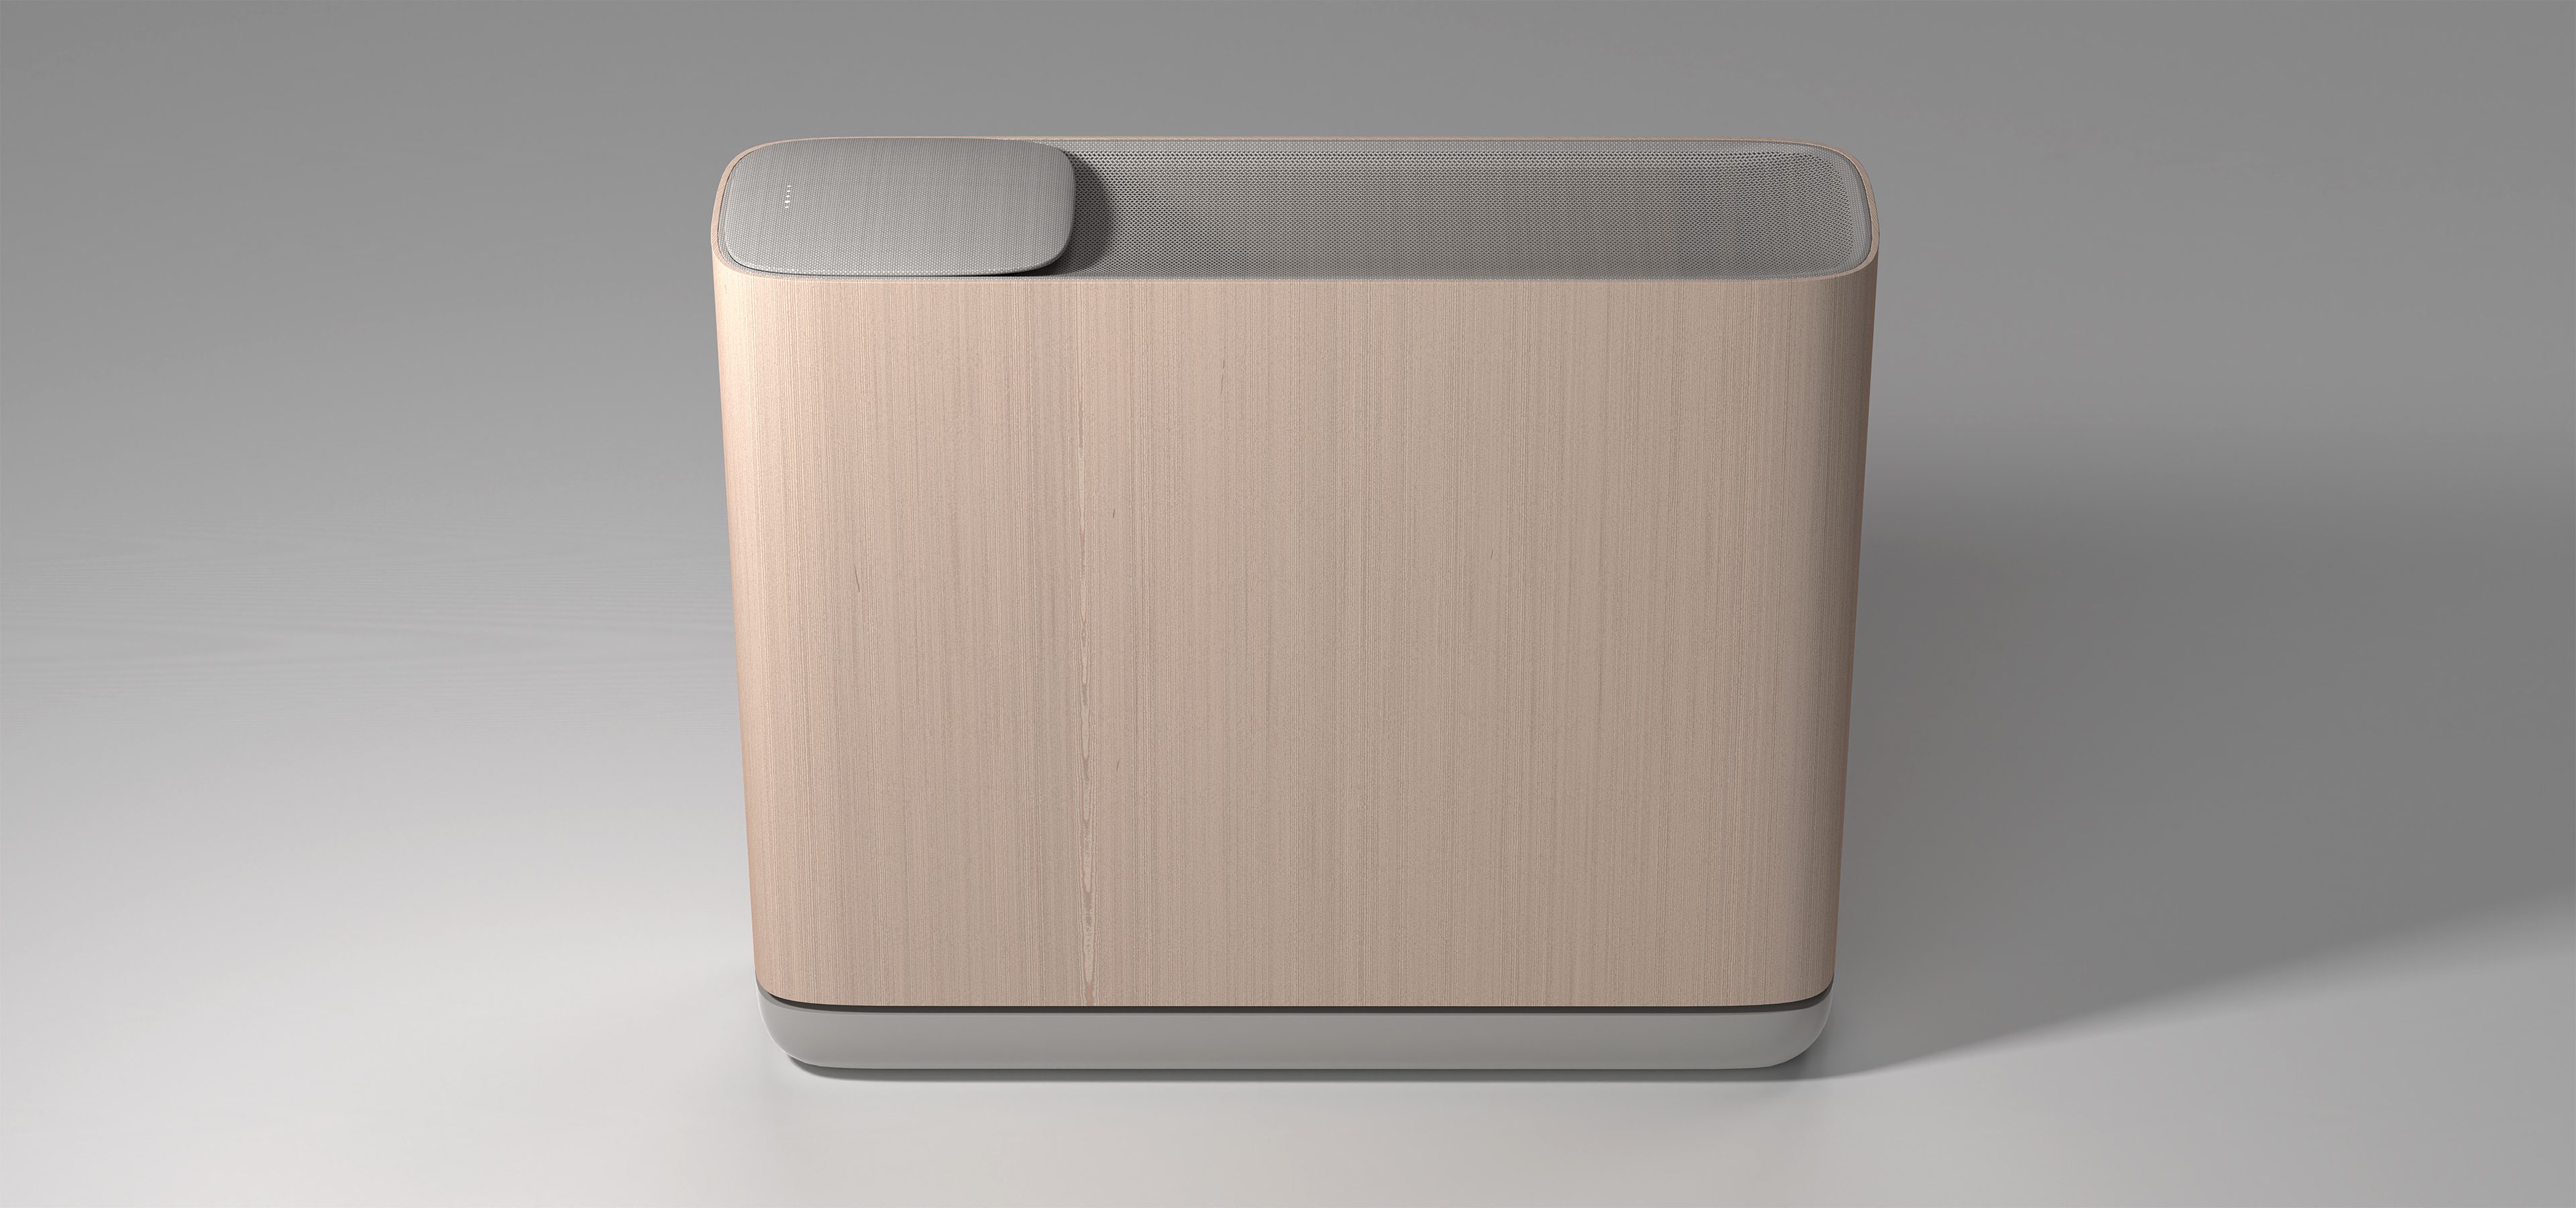 Aalto Air purifier shown in side view perspective.